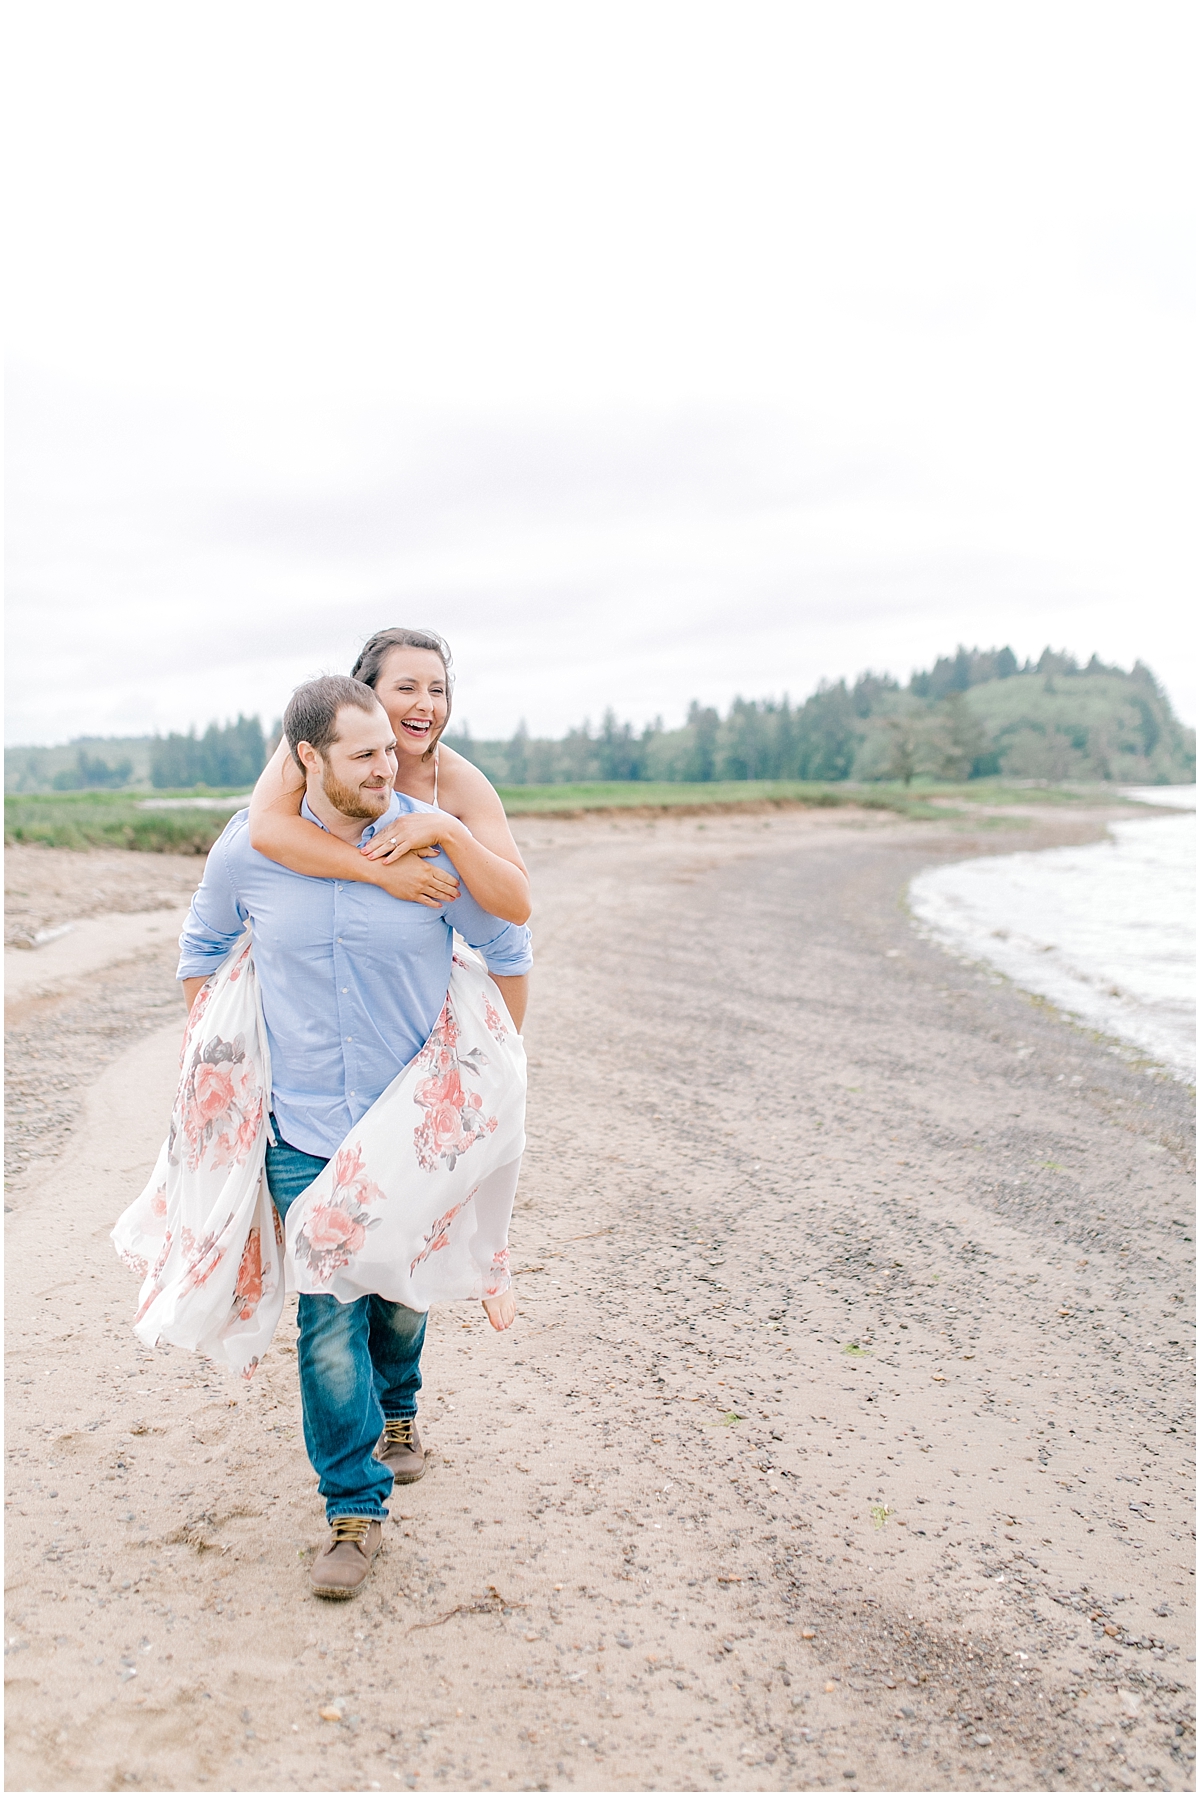 Gorgeous Beach and Ranch Engagement Session, Pacific Northwest Elopement Wedding Photographer, What to Wear to Engagement Pictures, Kindred Presets, Seattle Wedding Photographer46.jpg